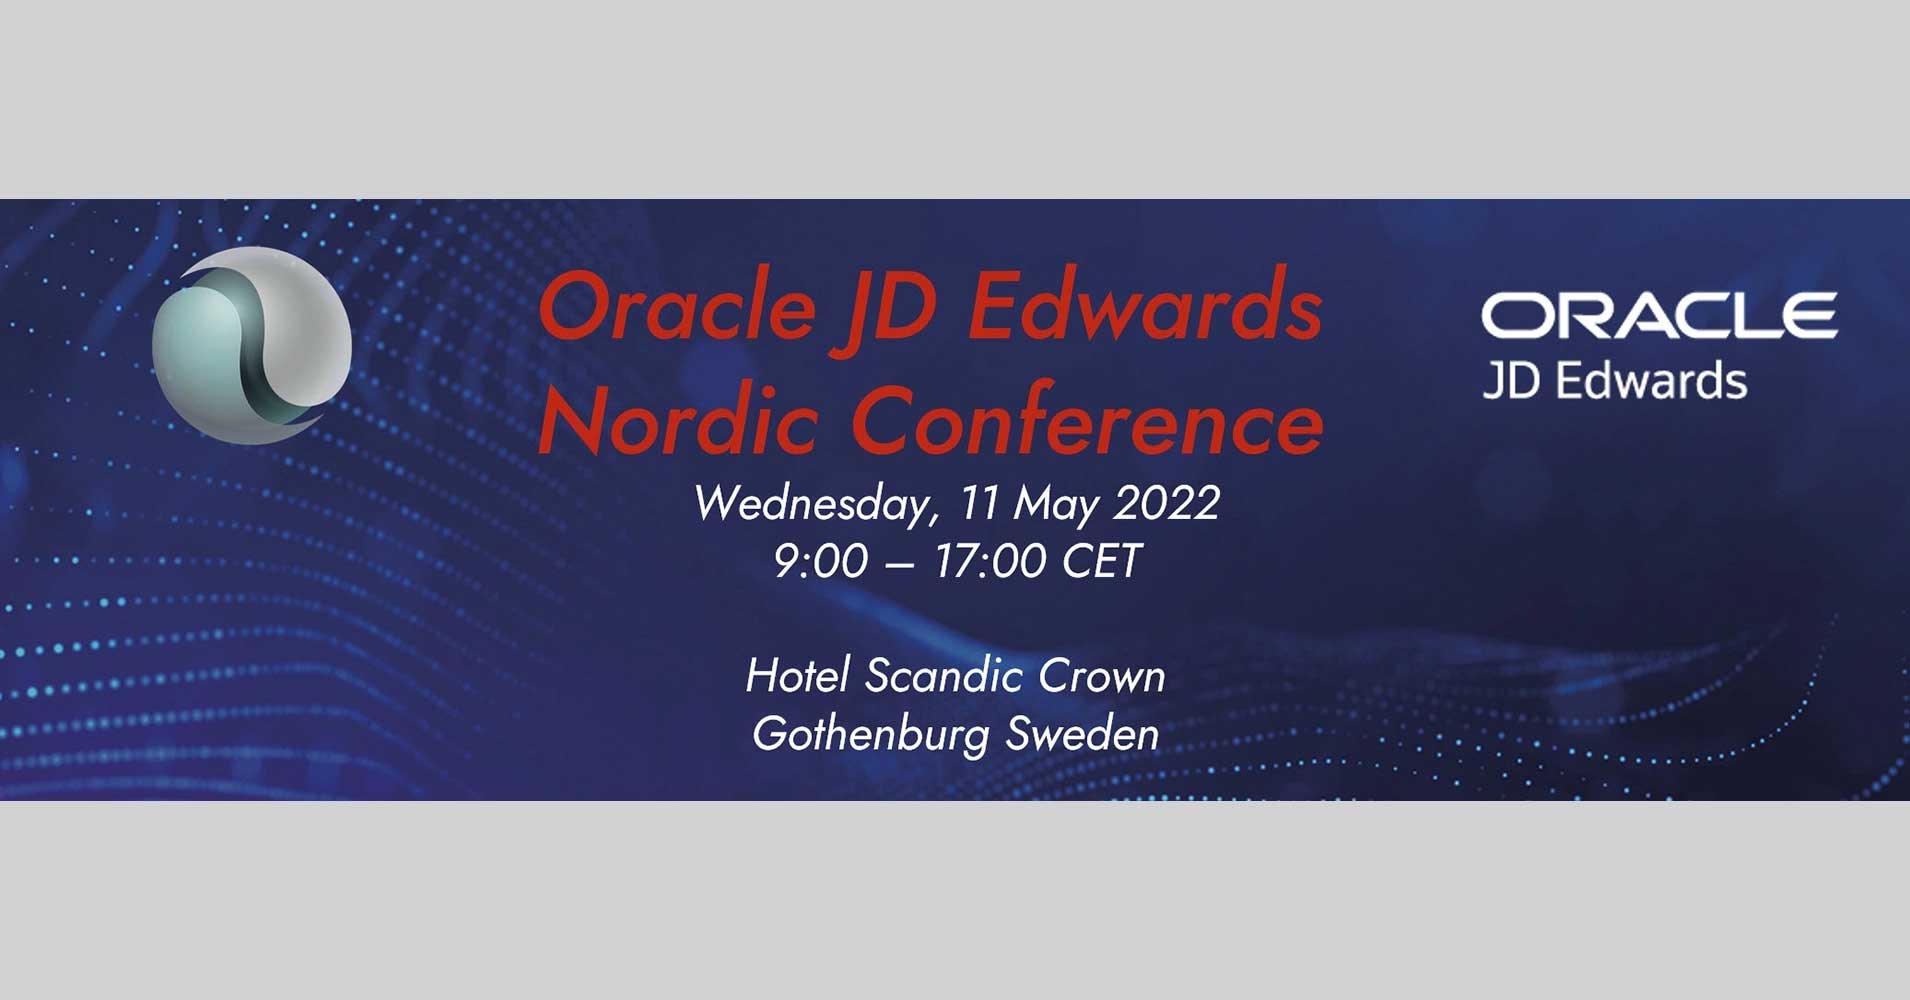 Oracle JD Edwards Nordic Conference 2022